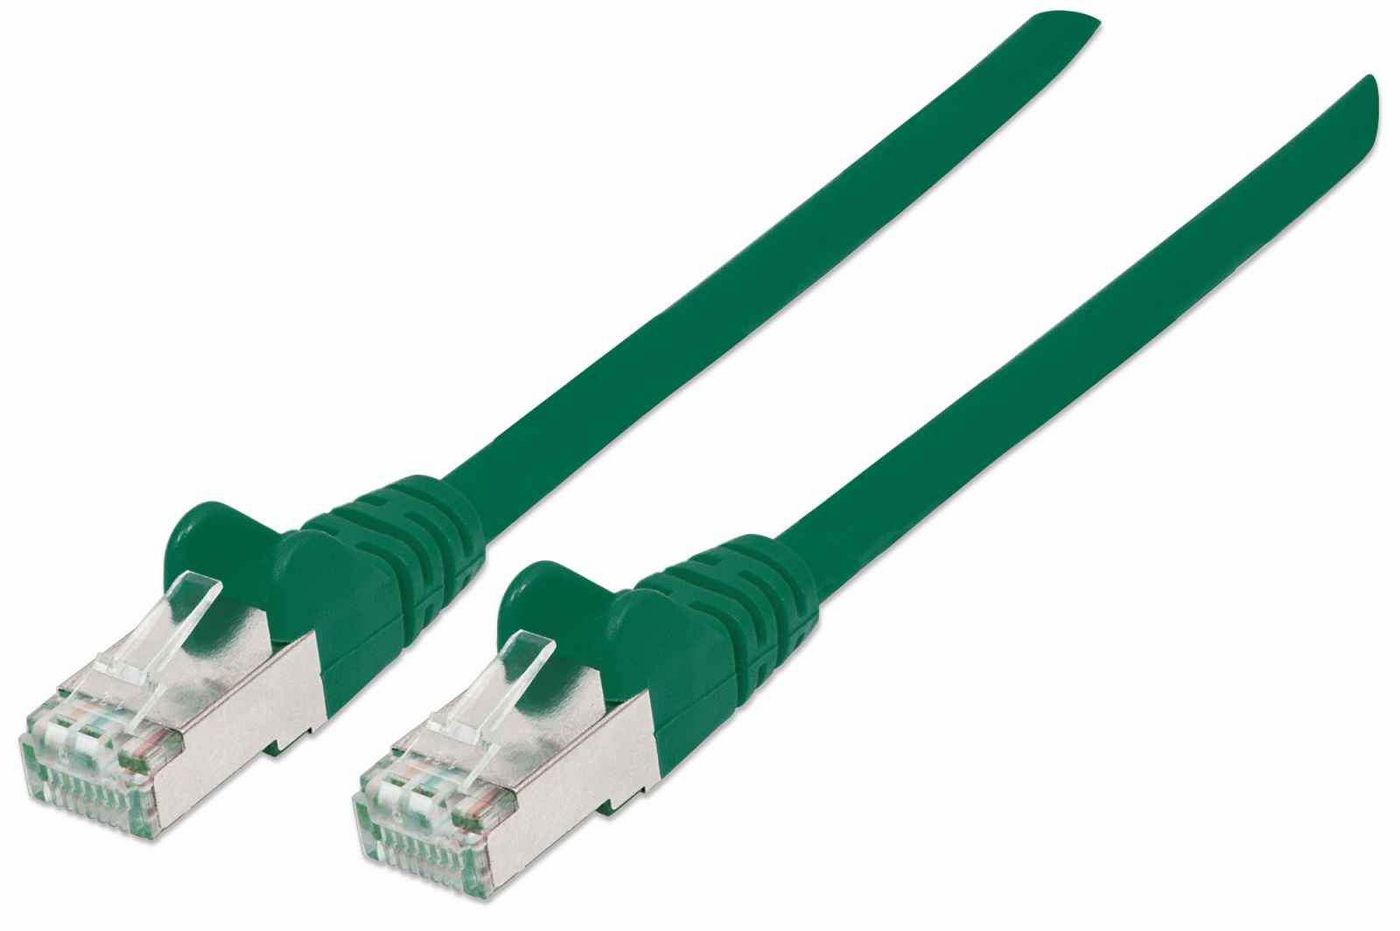 Intellinet 740654 High Performance Network Cable 